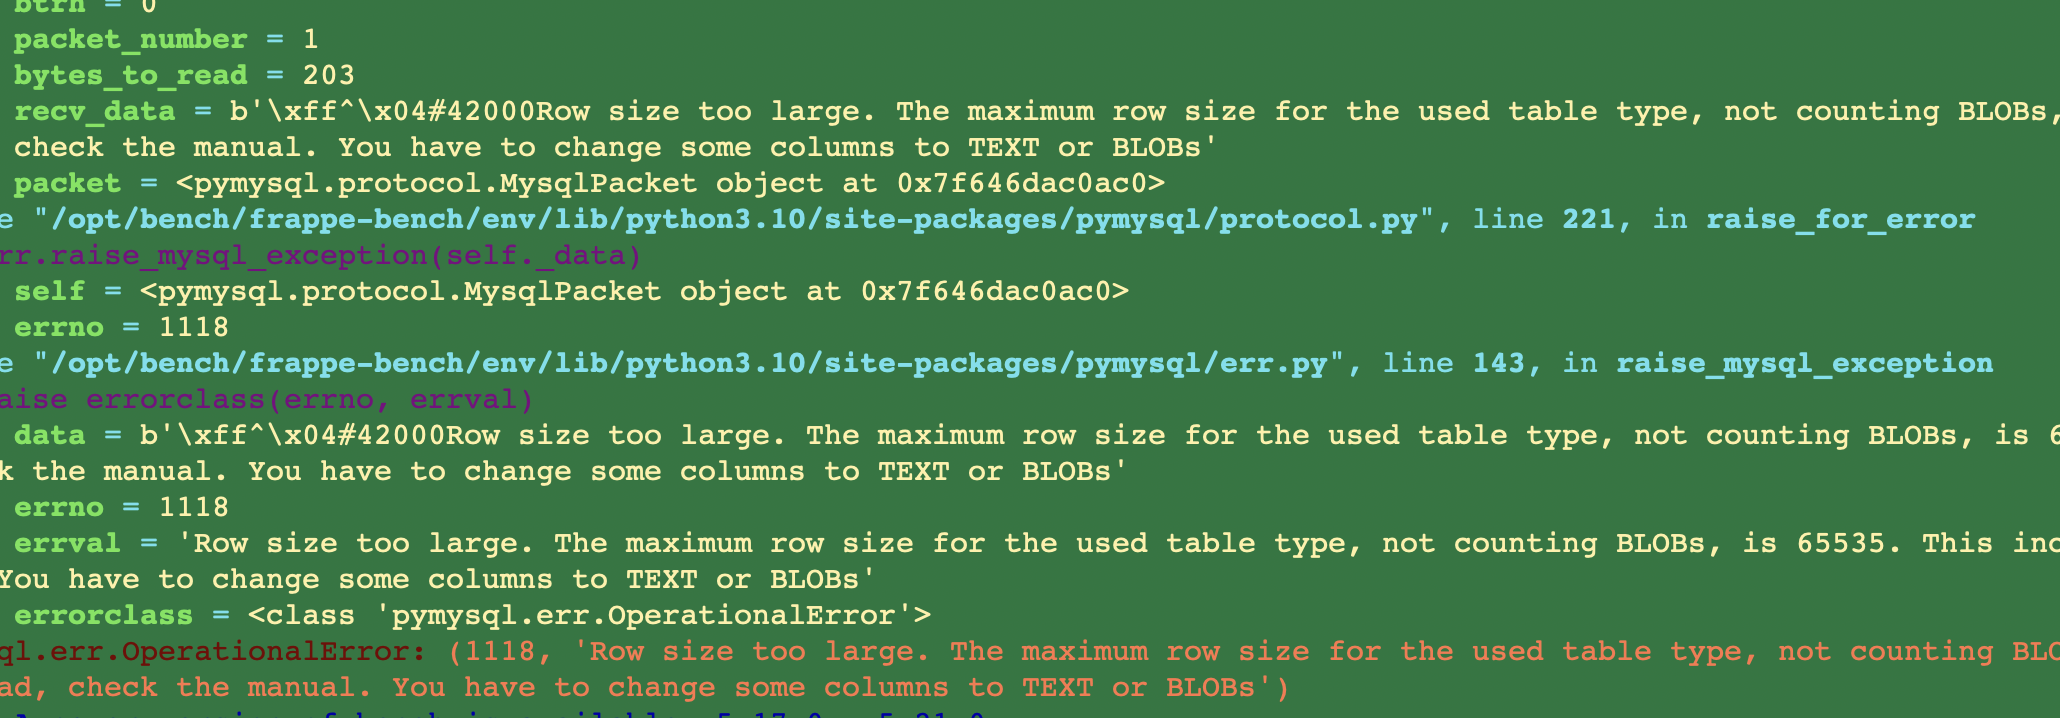 Row size too large. The maximum row size for the used table type, not counting BLOBs, is 65535 - Cover Image